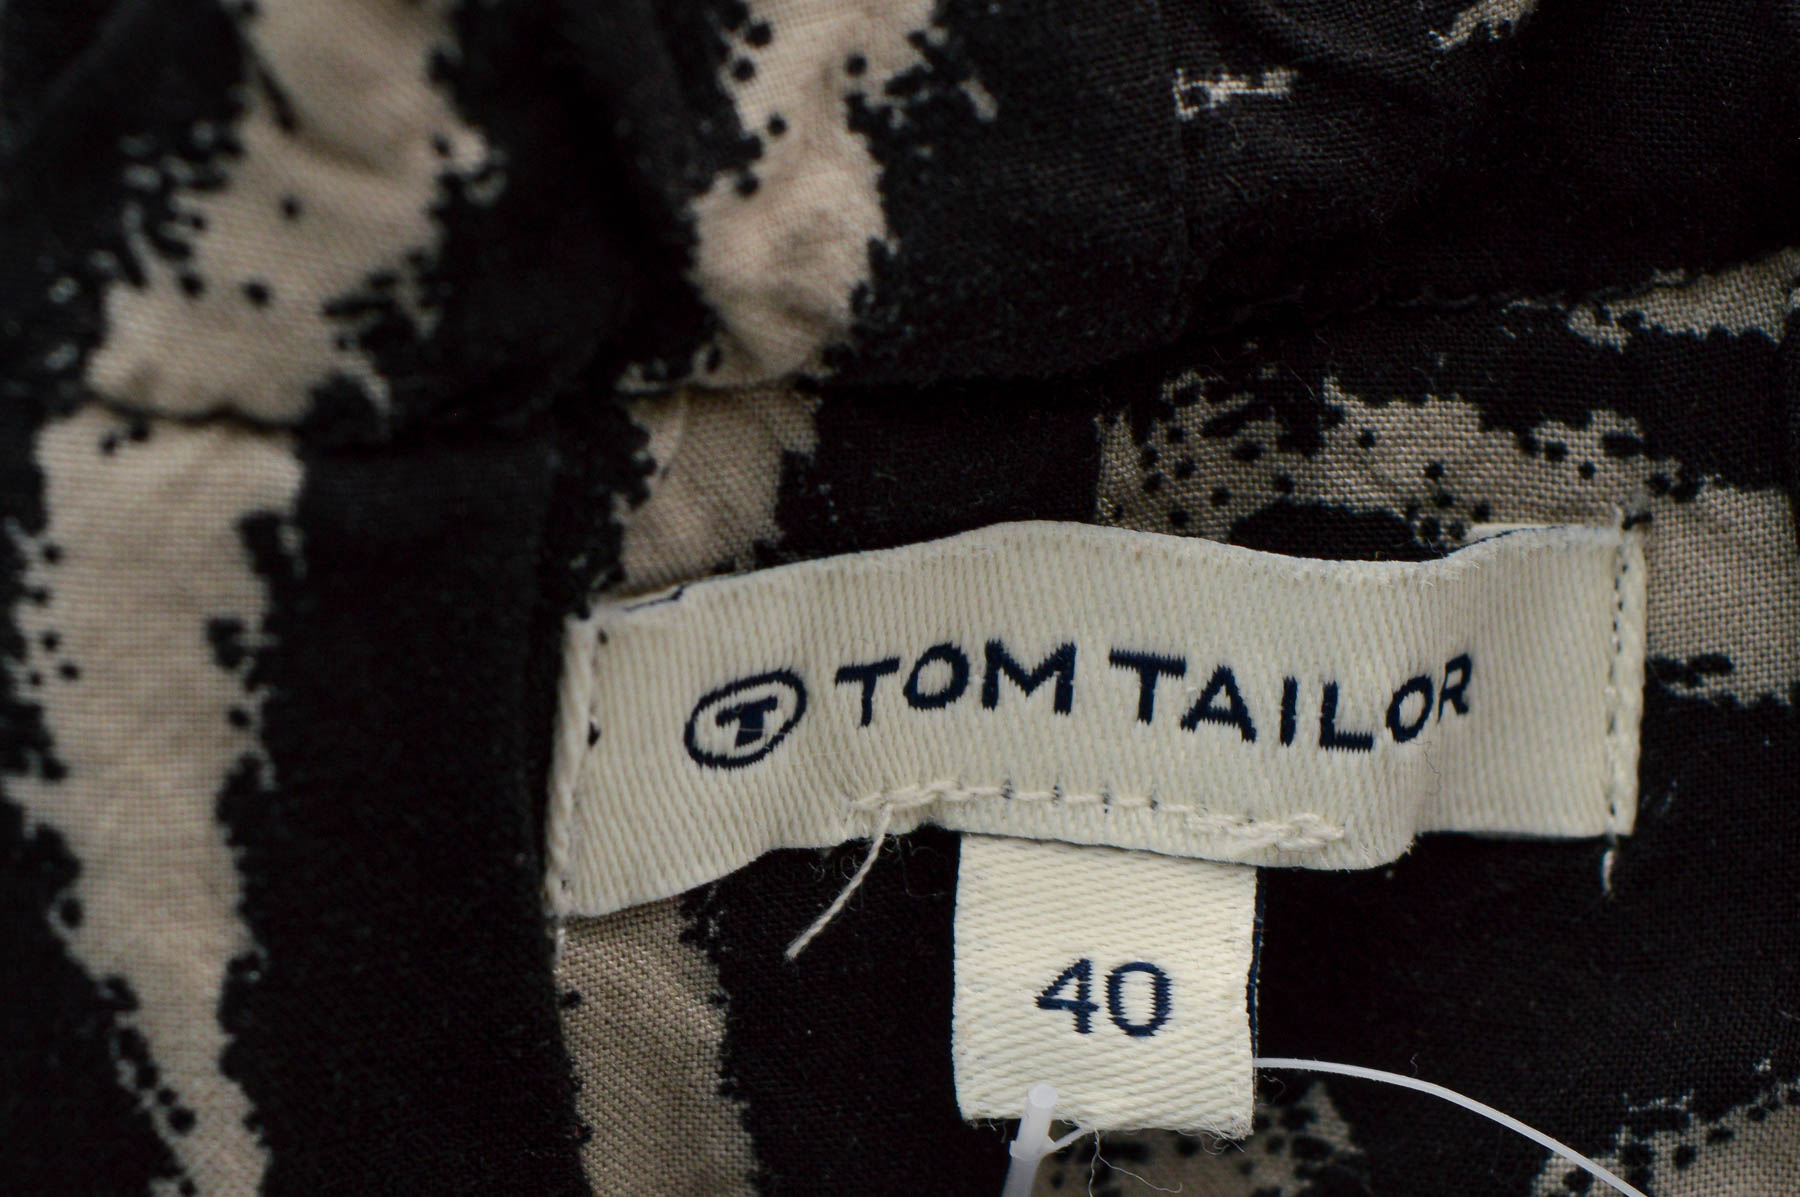 Women's trousers - TOM TAILOR - 2